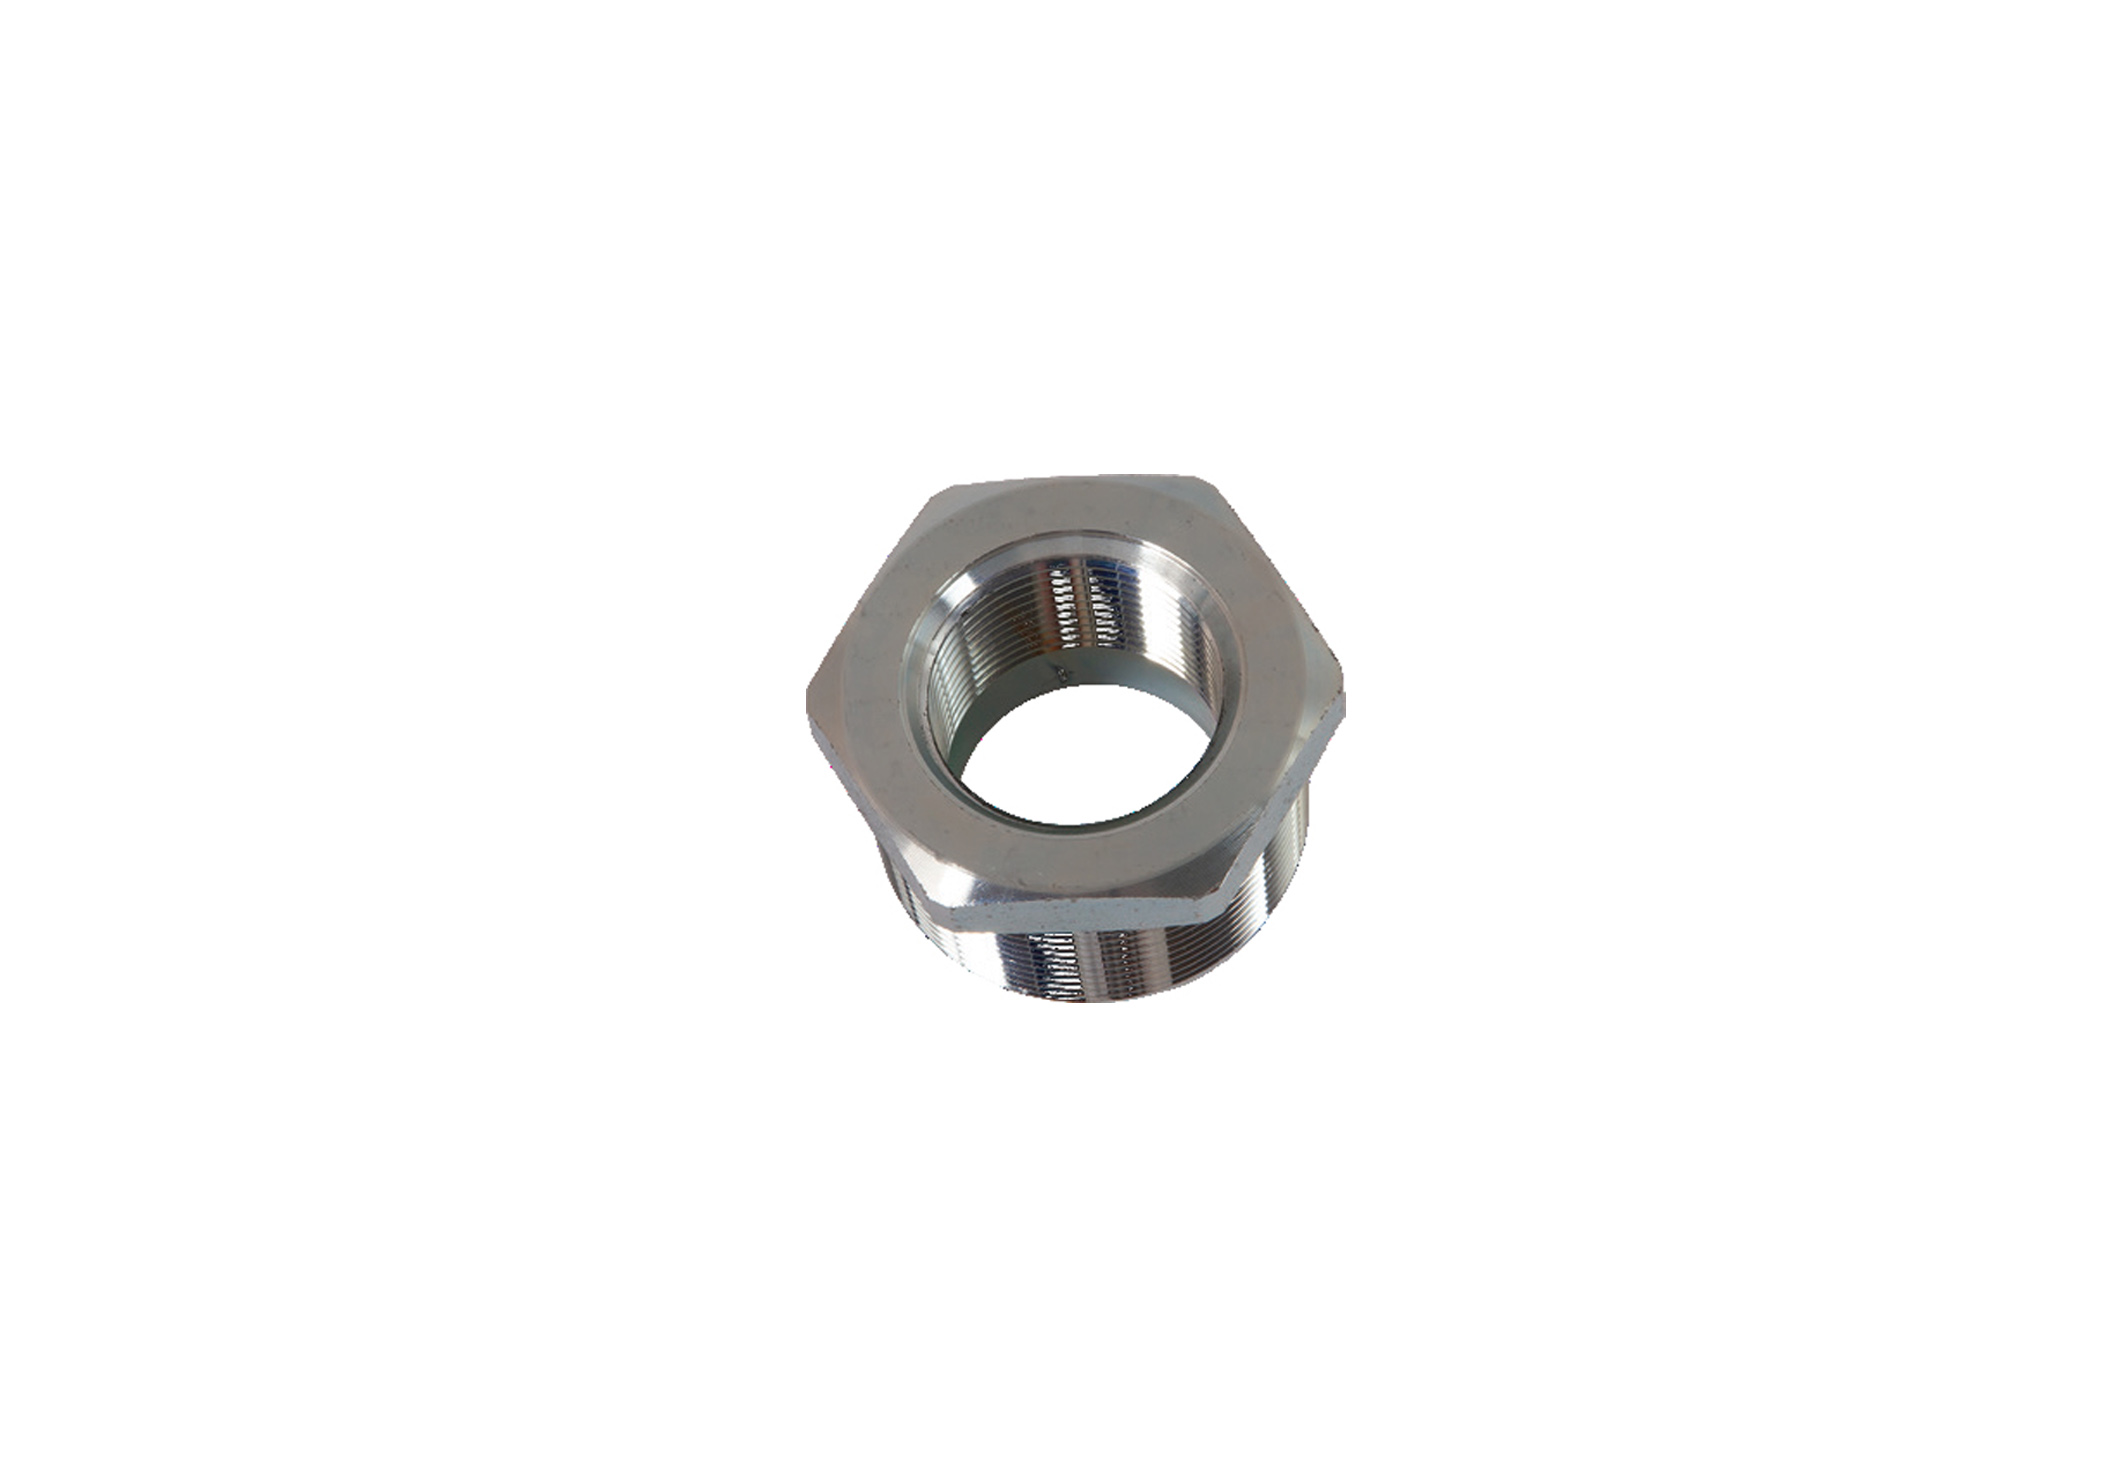 Port Reducer Bushing - 2 X 1 14 Porting Components